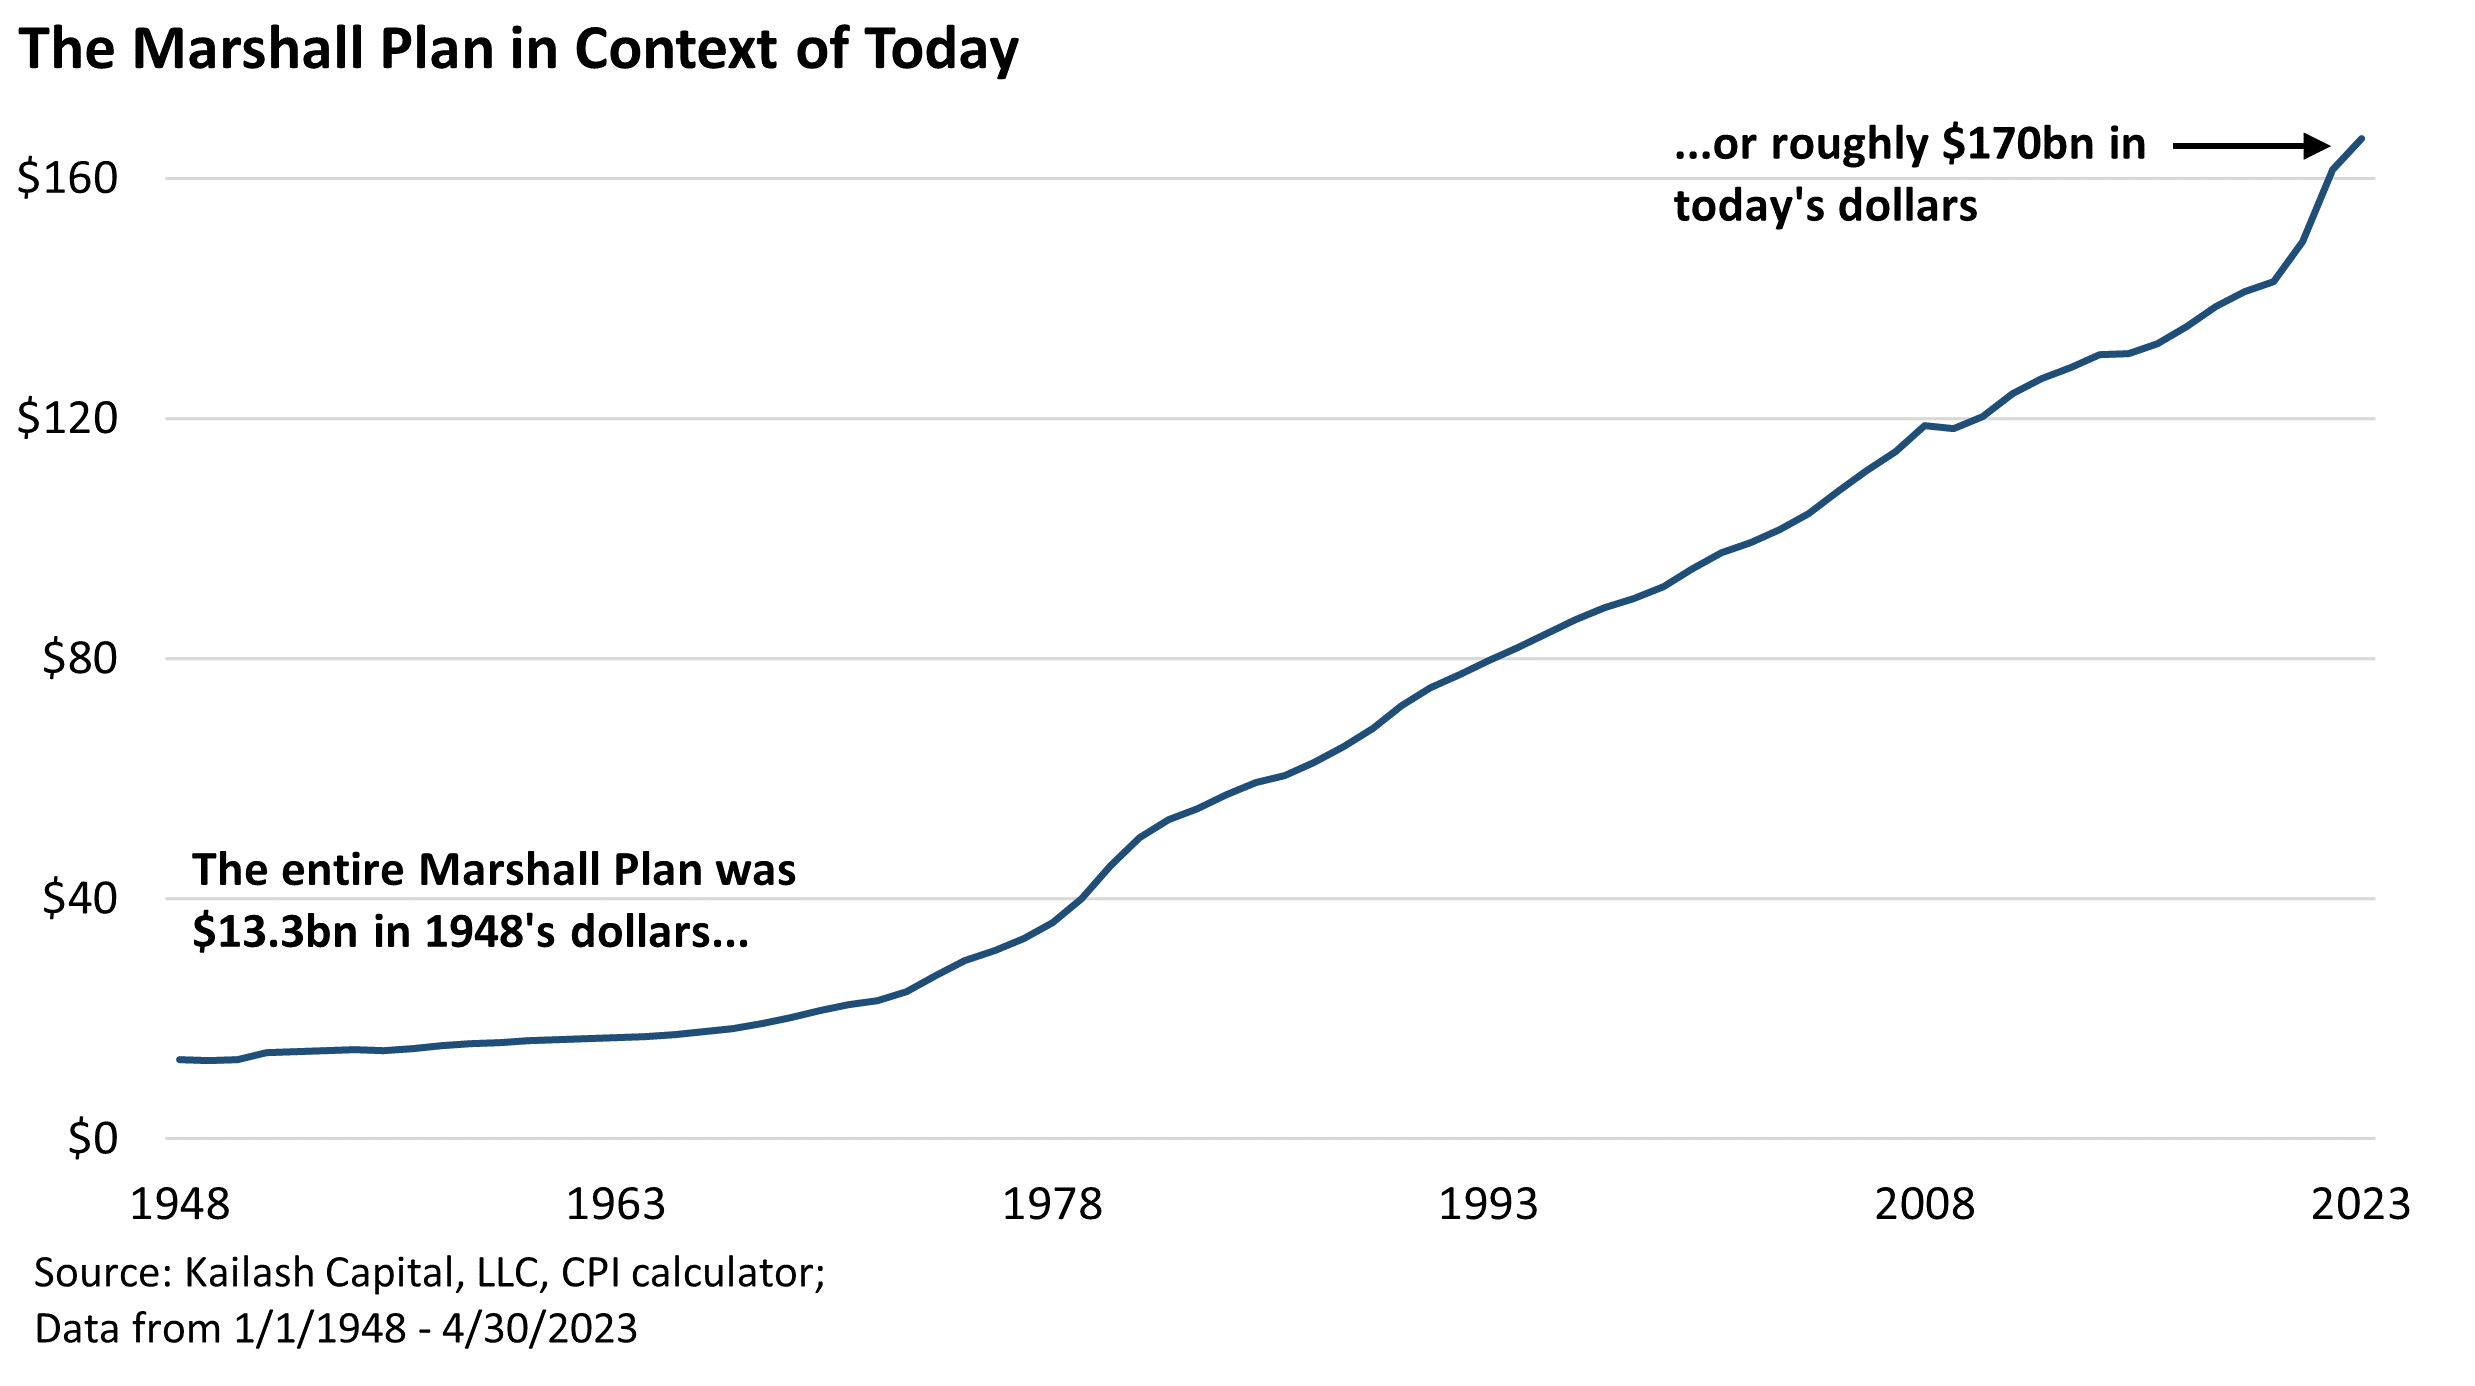 The Marshall Plan in Context